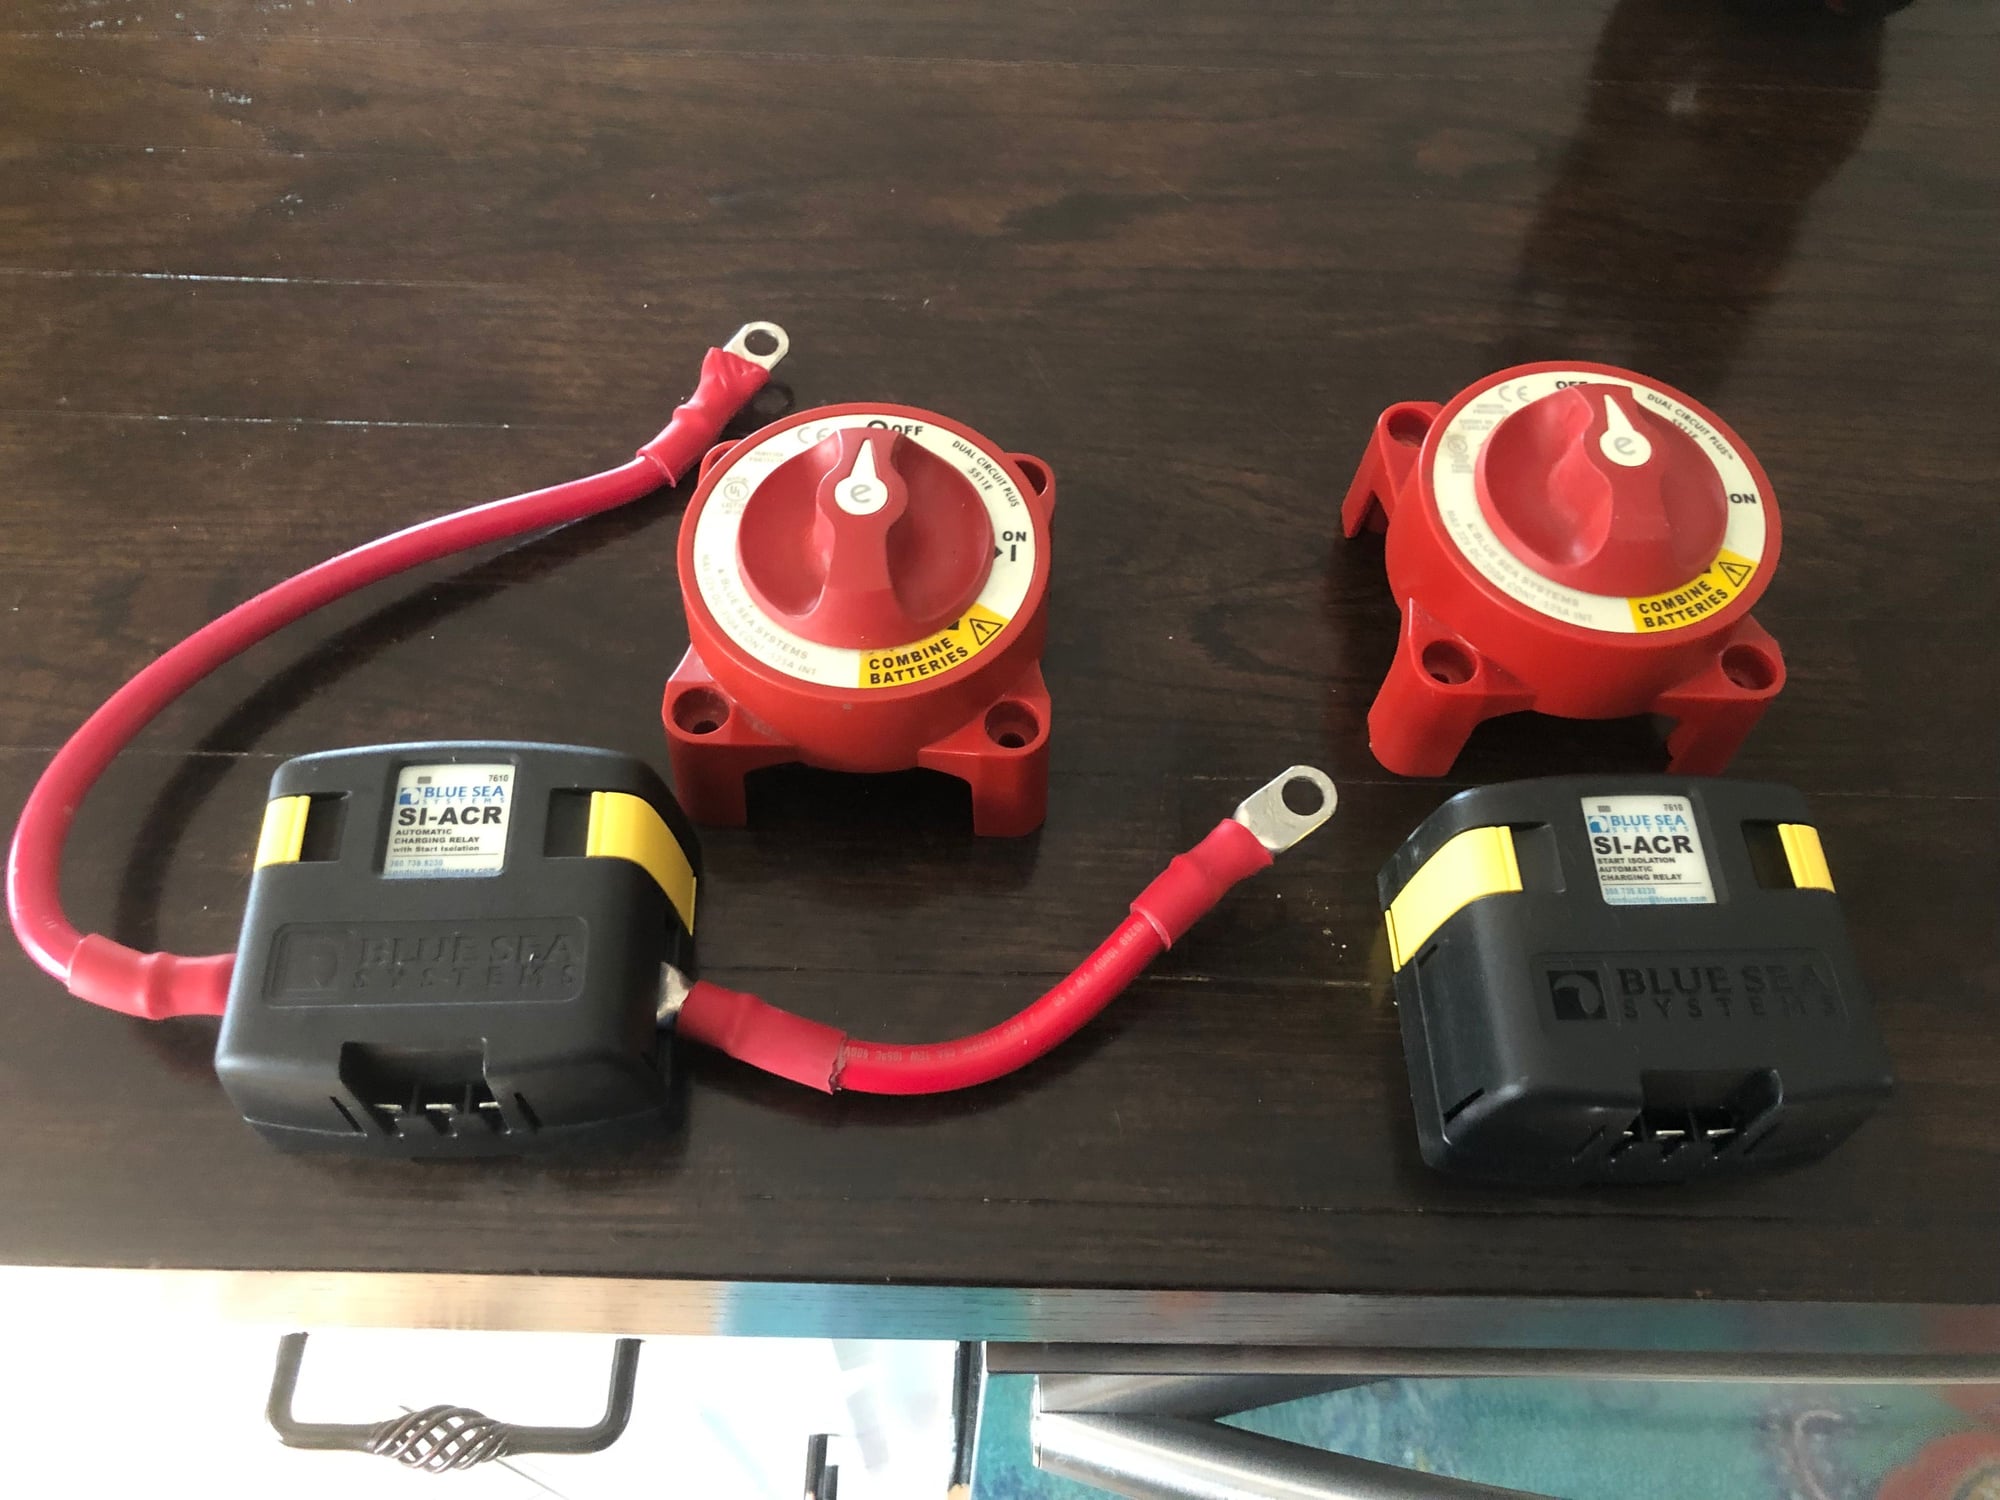 electric reel batteries? - The Hull Truth - Boating and Fishing Forum